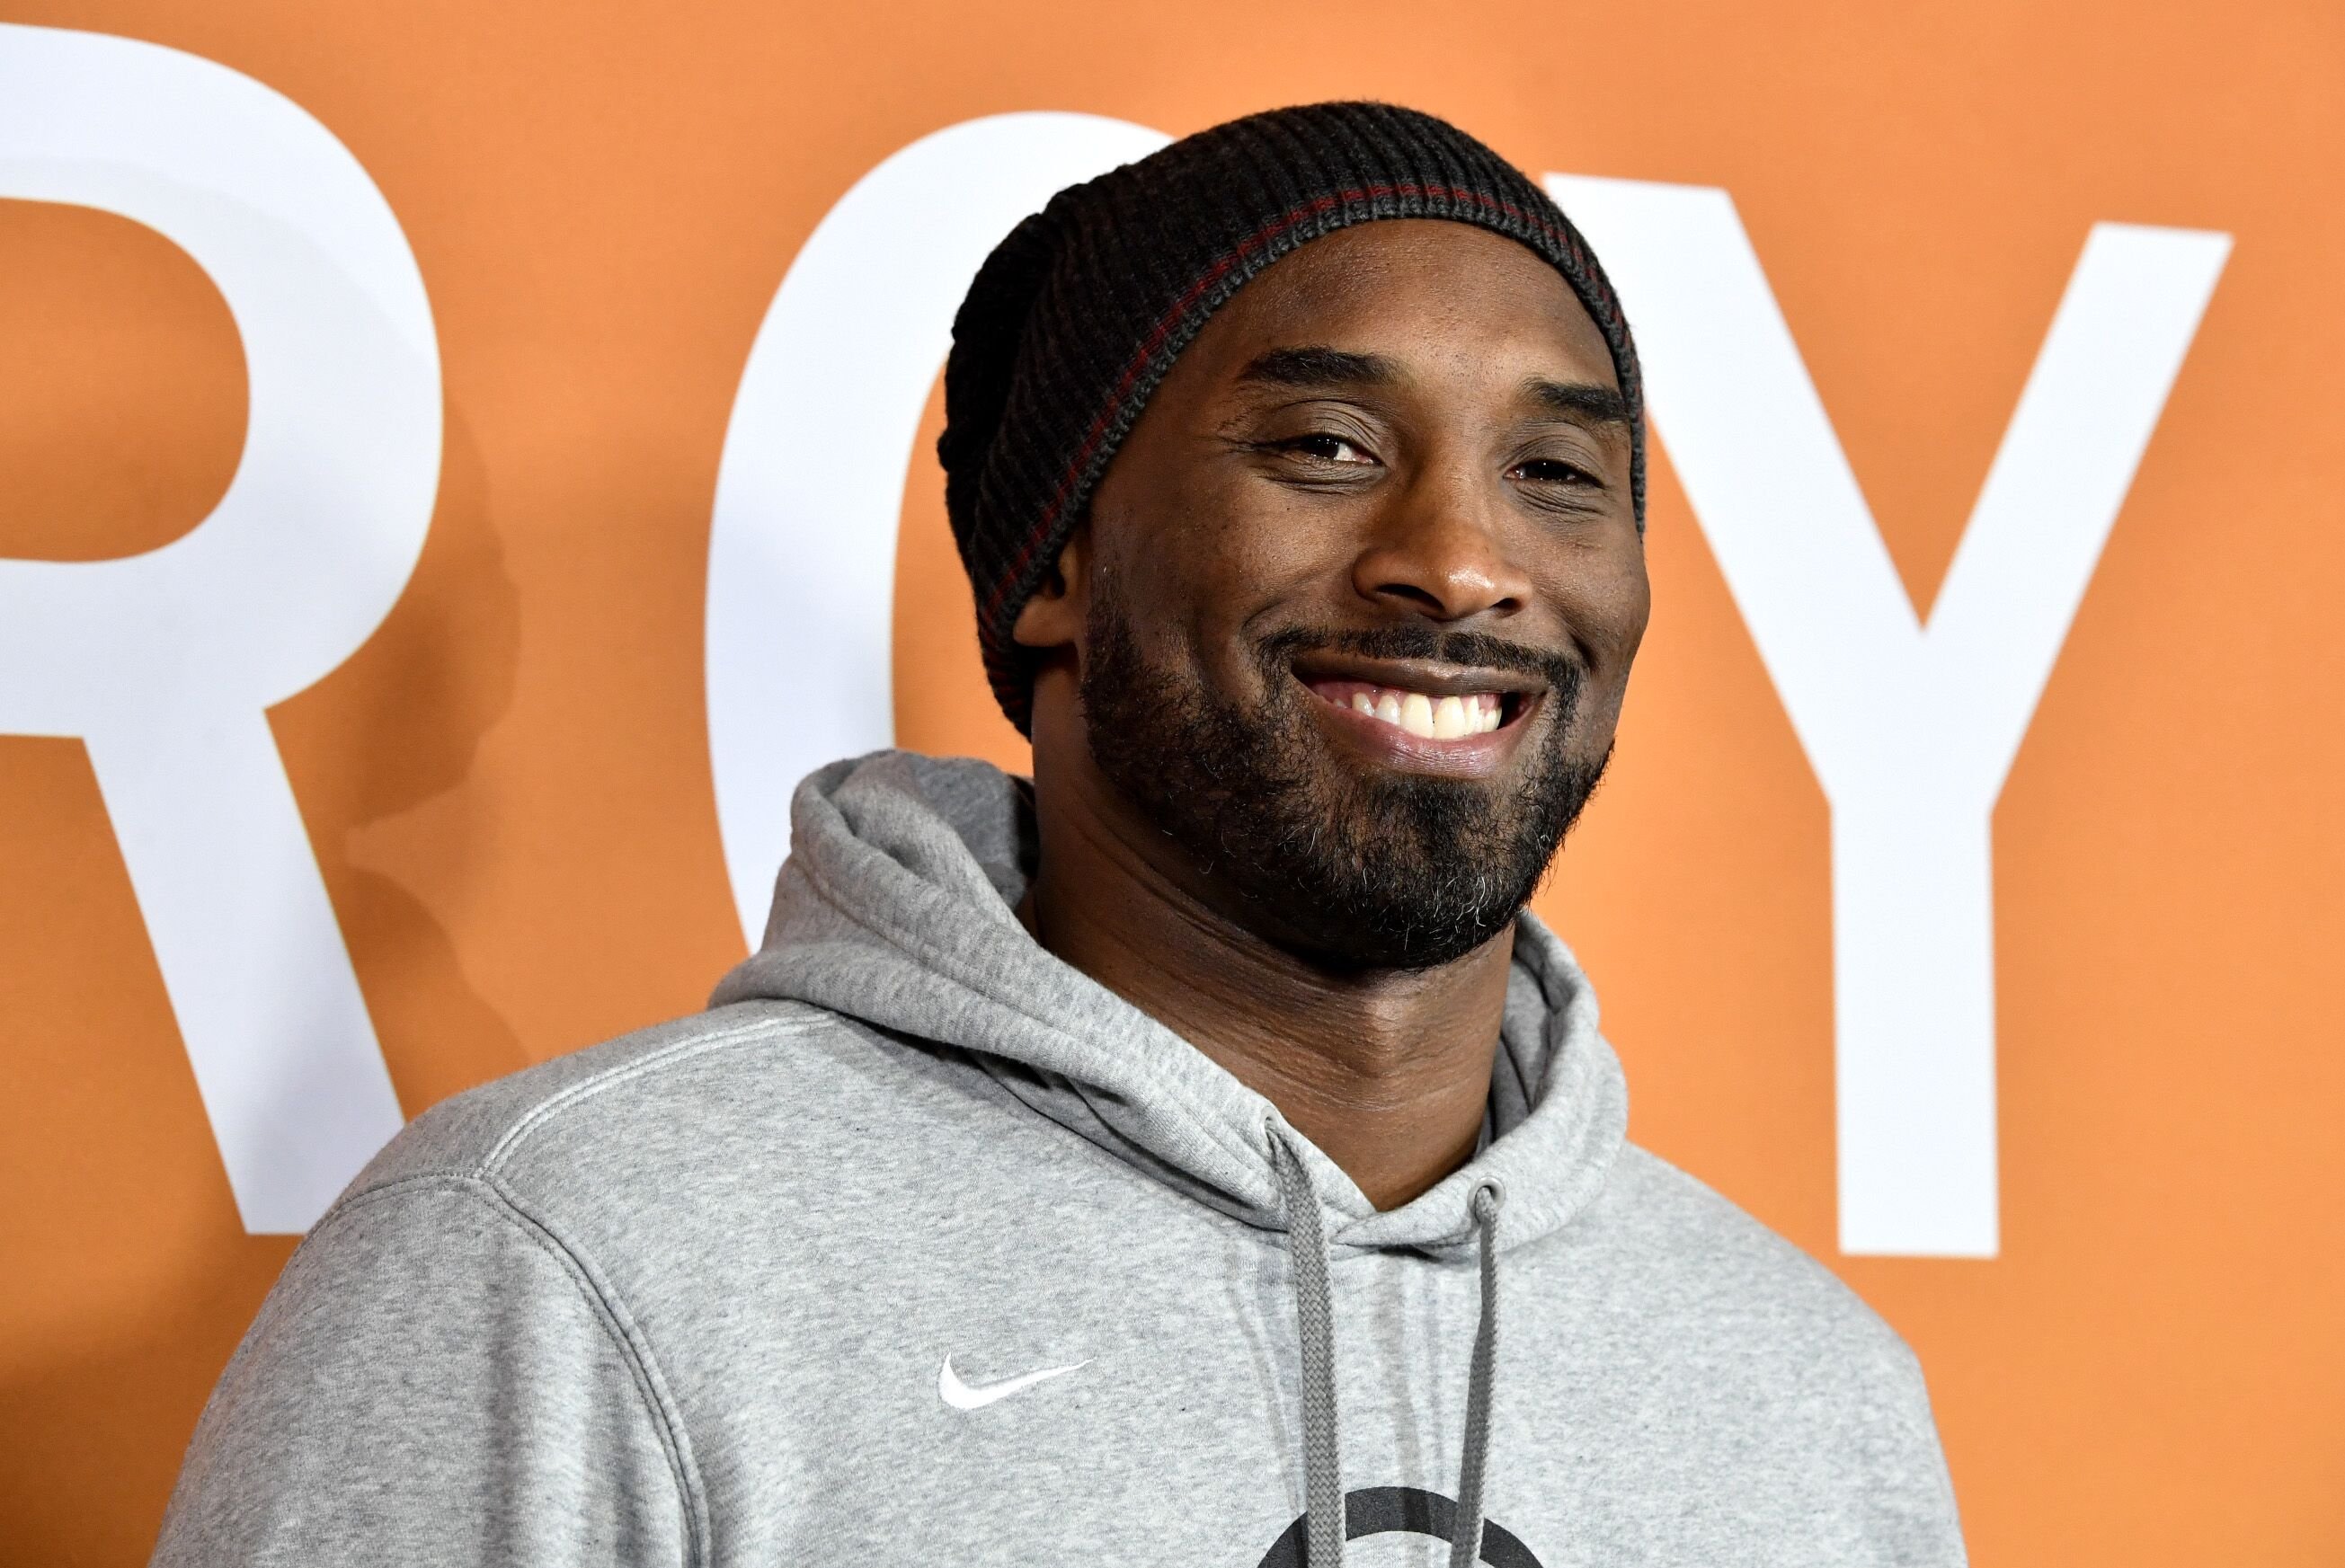 Kobe Bryant at the screening of "Just Mercy" on January 6, 2020. | Photo: Getty Images